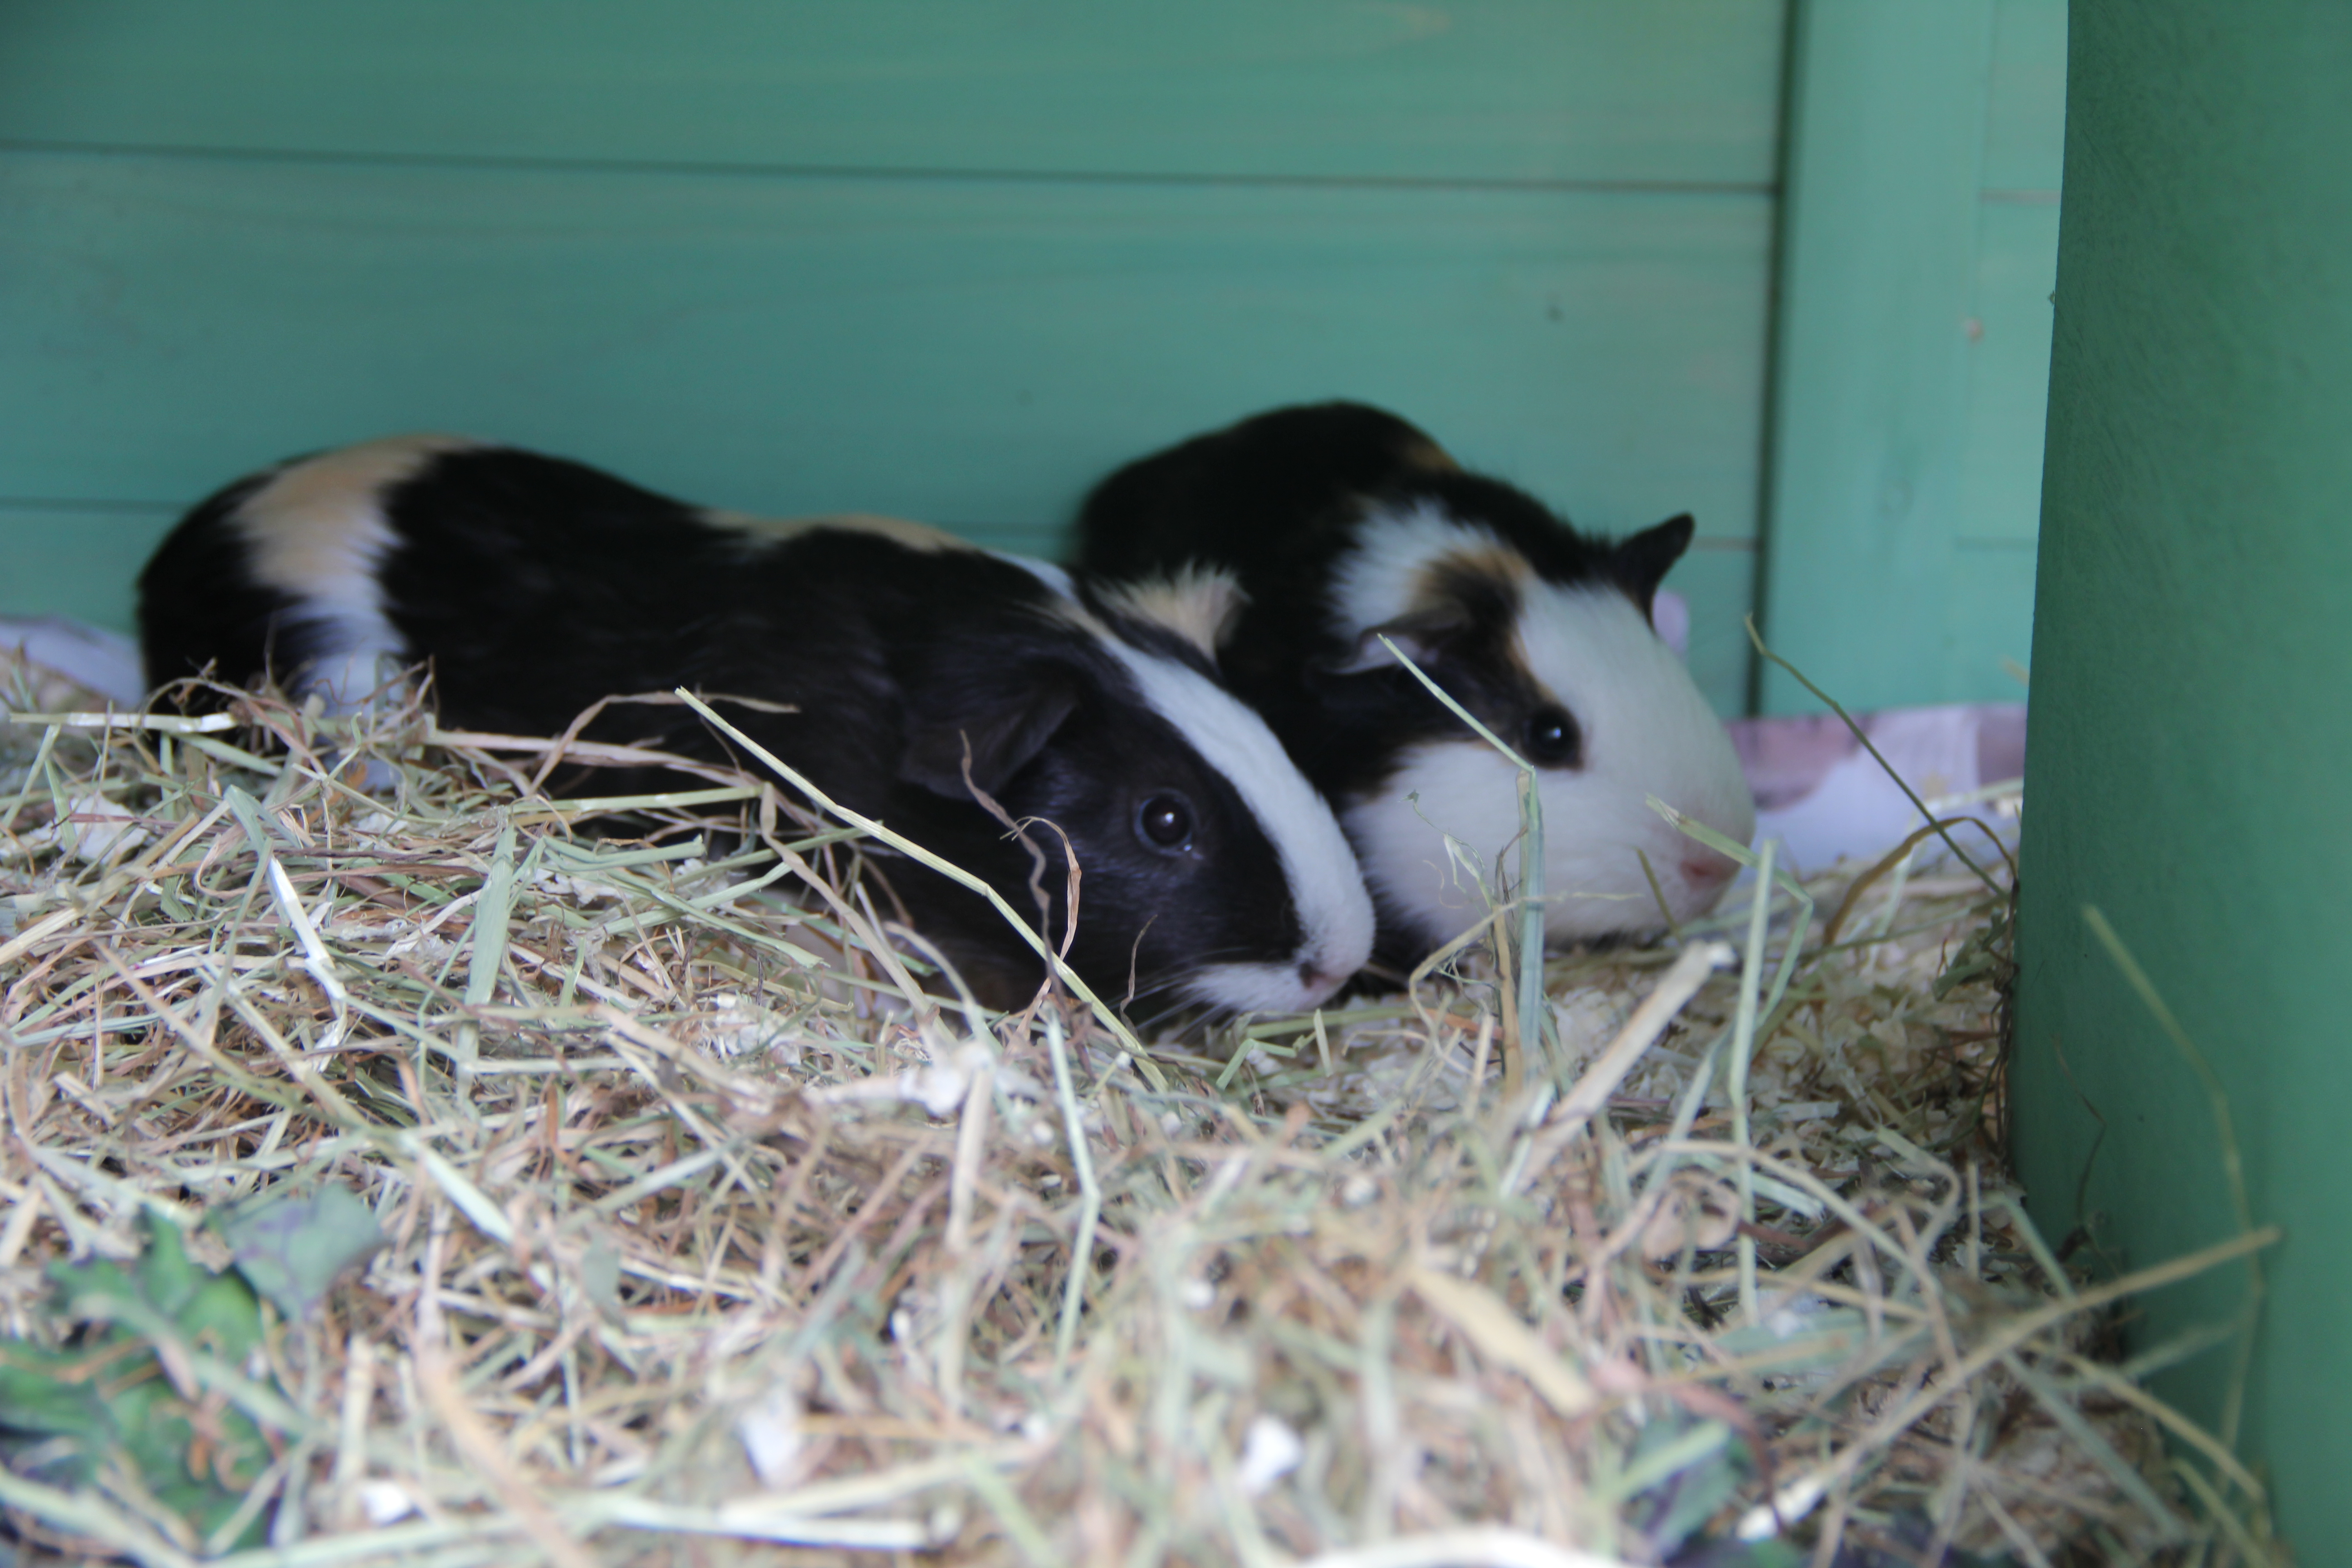 Guinea pigs take up residence to provide therapy for service users